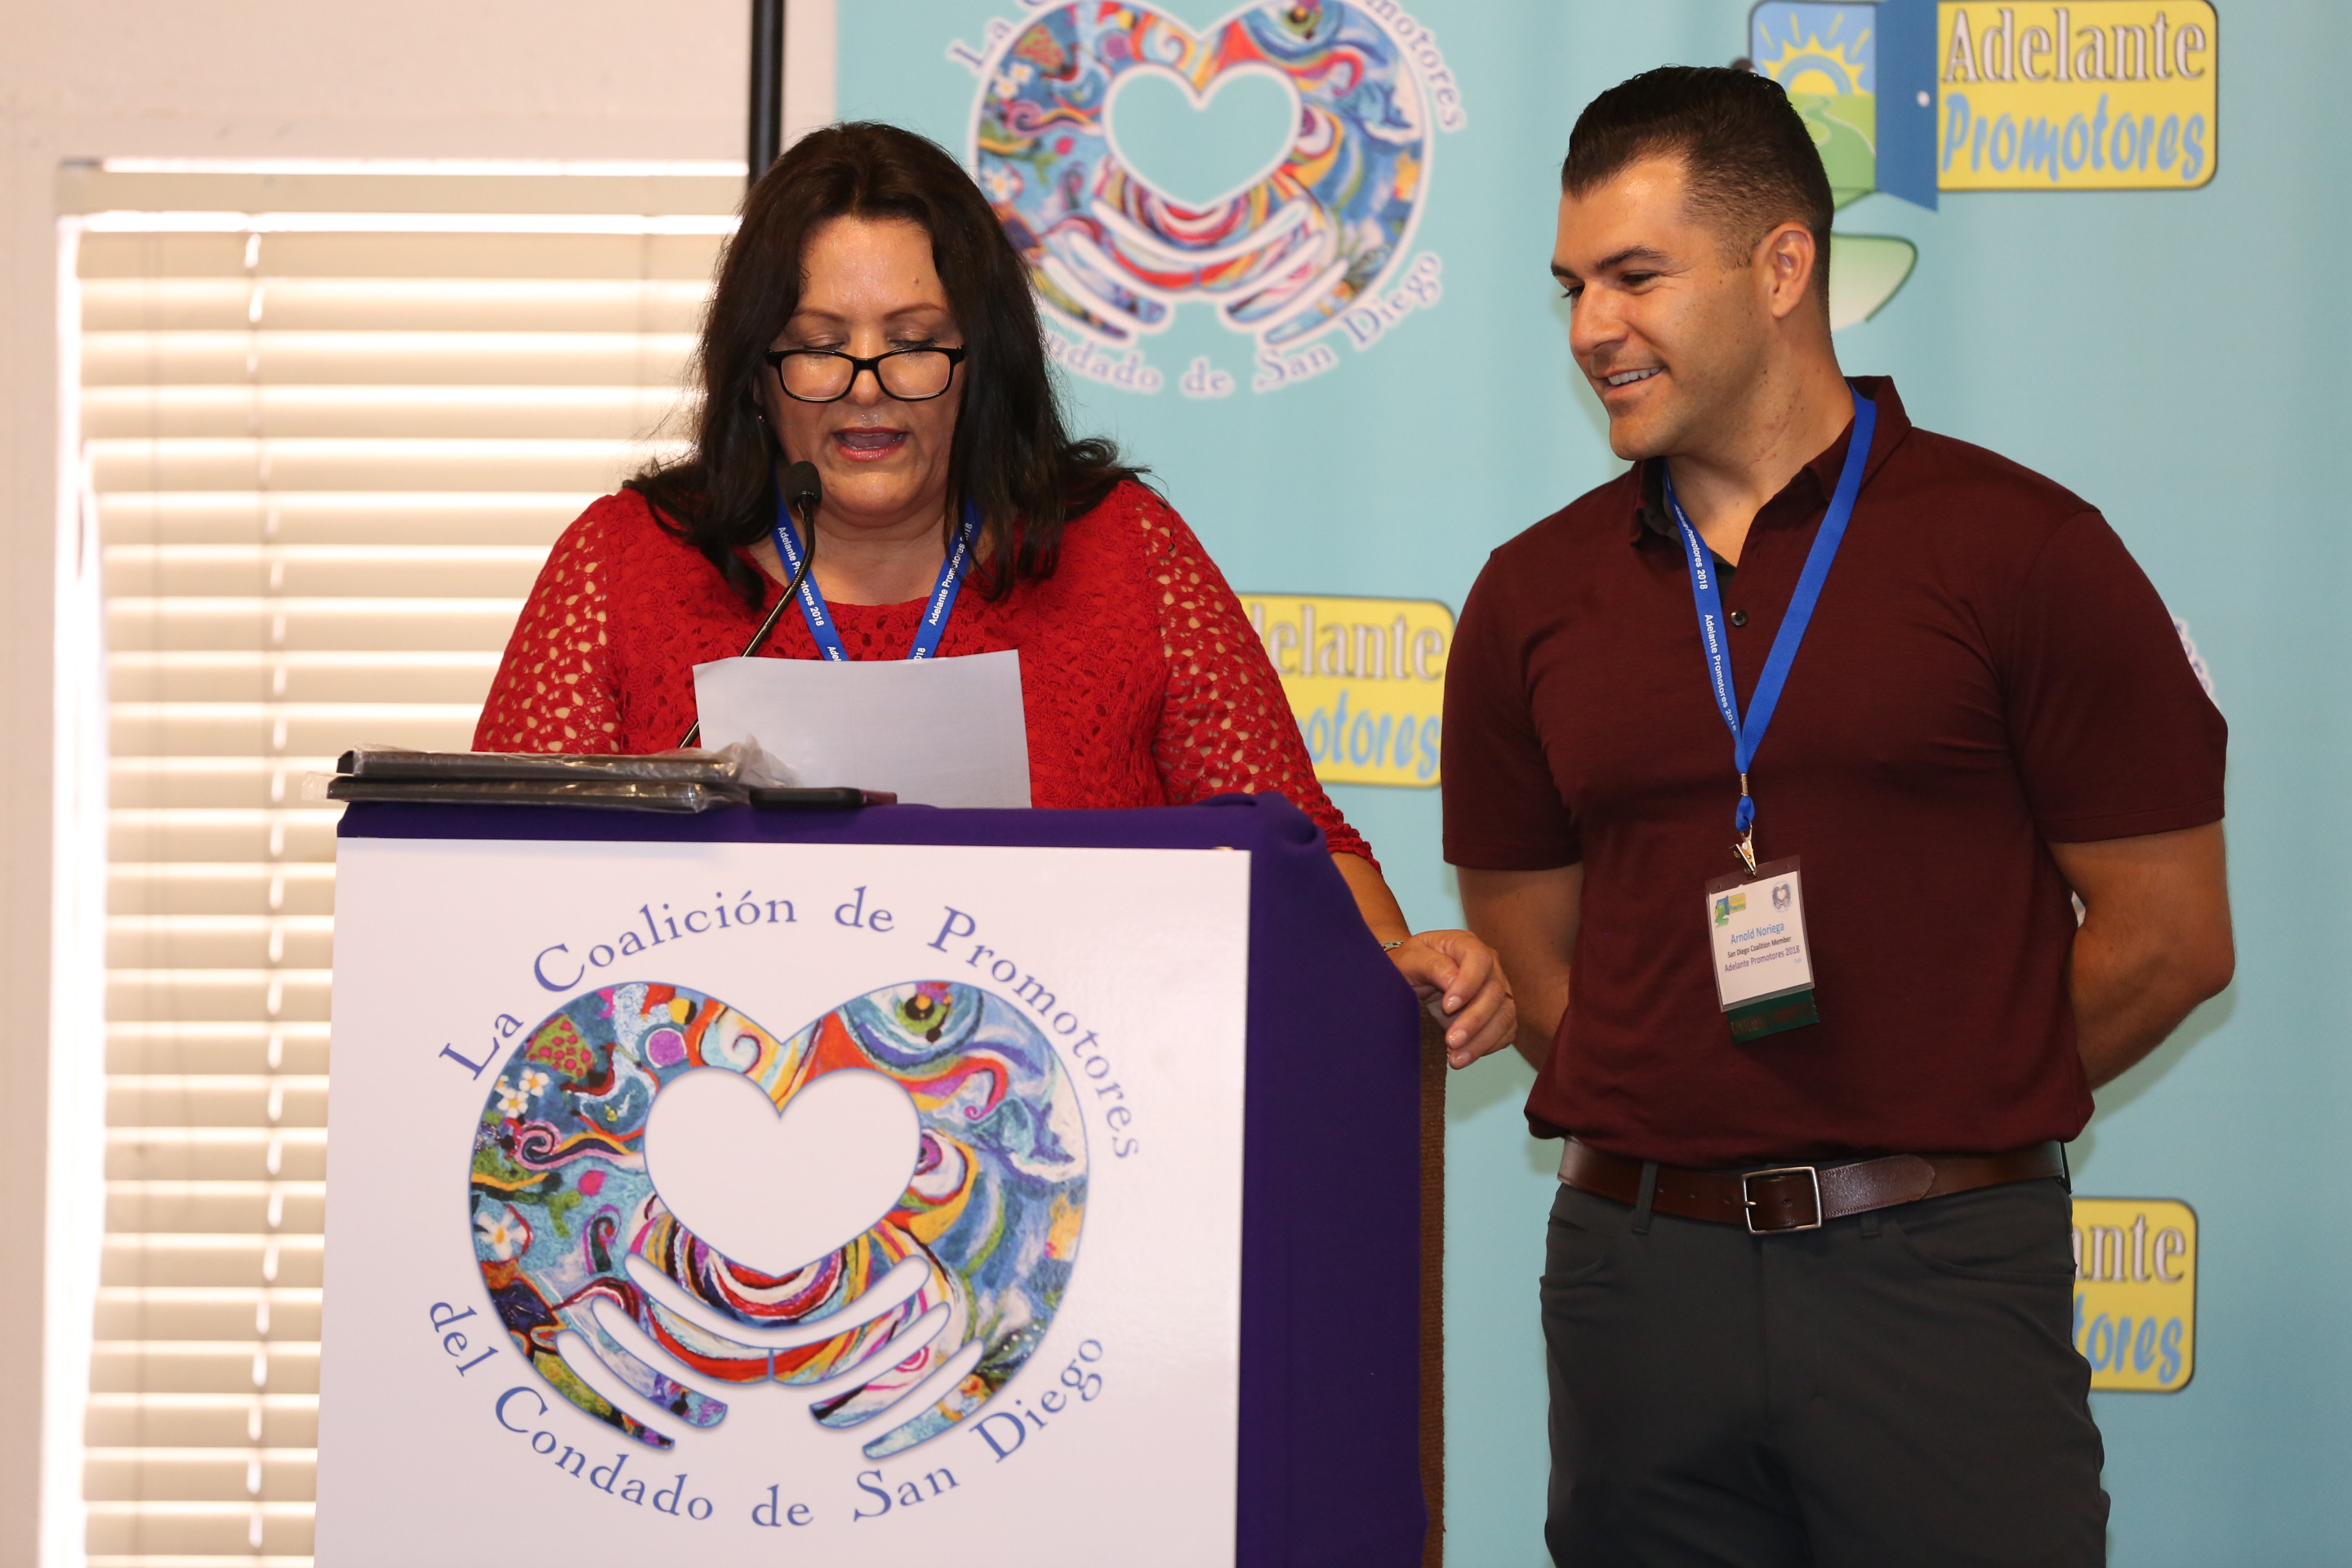 2018 Adelante Promotores Conference Opening Remarks, Ms. Margarita Holguin (Left), Mr. Arnold Noriega (Right), Co-Chairs of the San Diego County Promotores Coalition